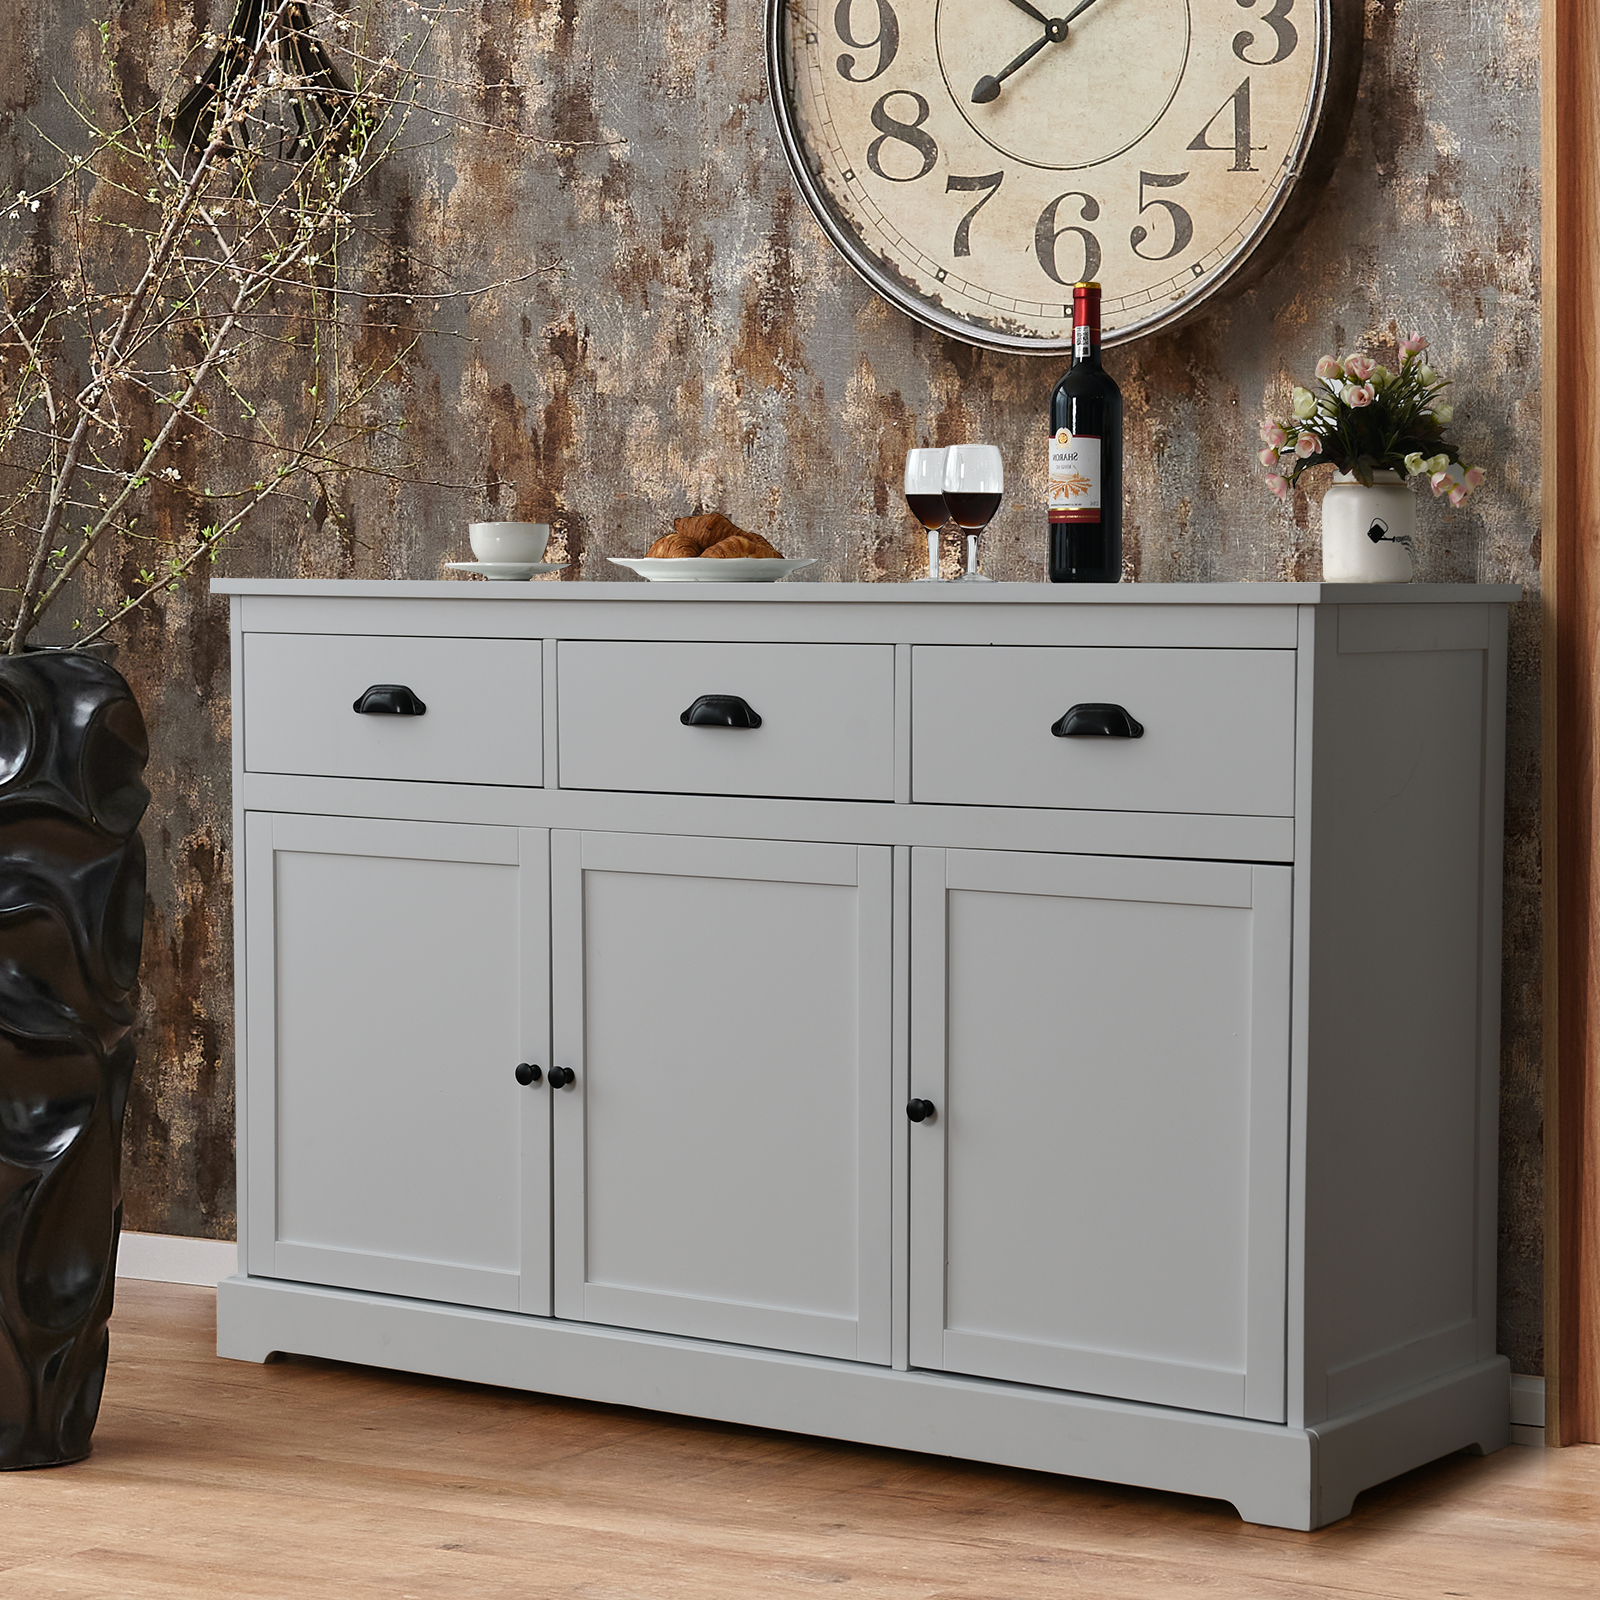 Buffet_Sideboard_with_2_Cabinets_and_3_Drawers_Grey-6.jpg